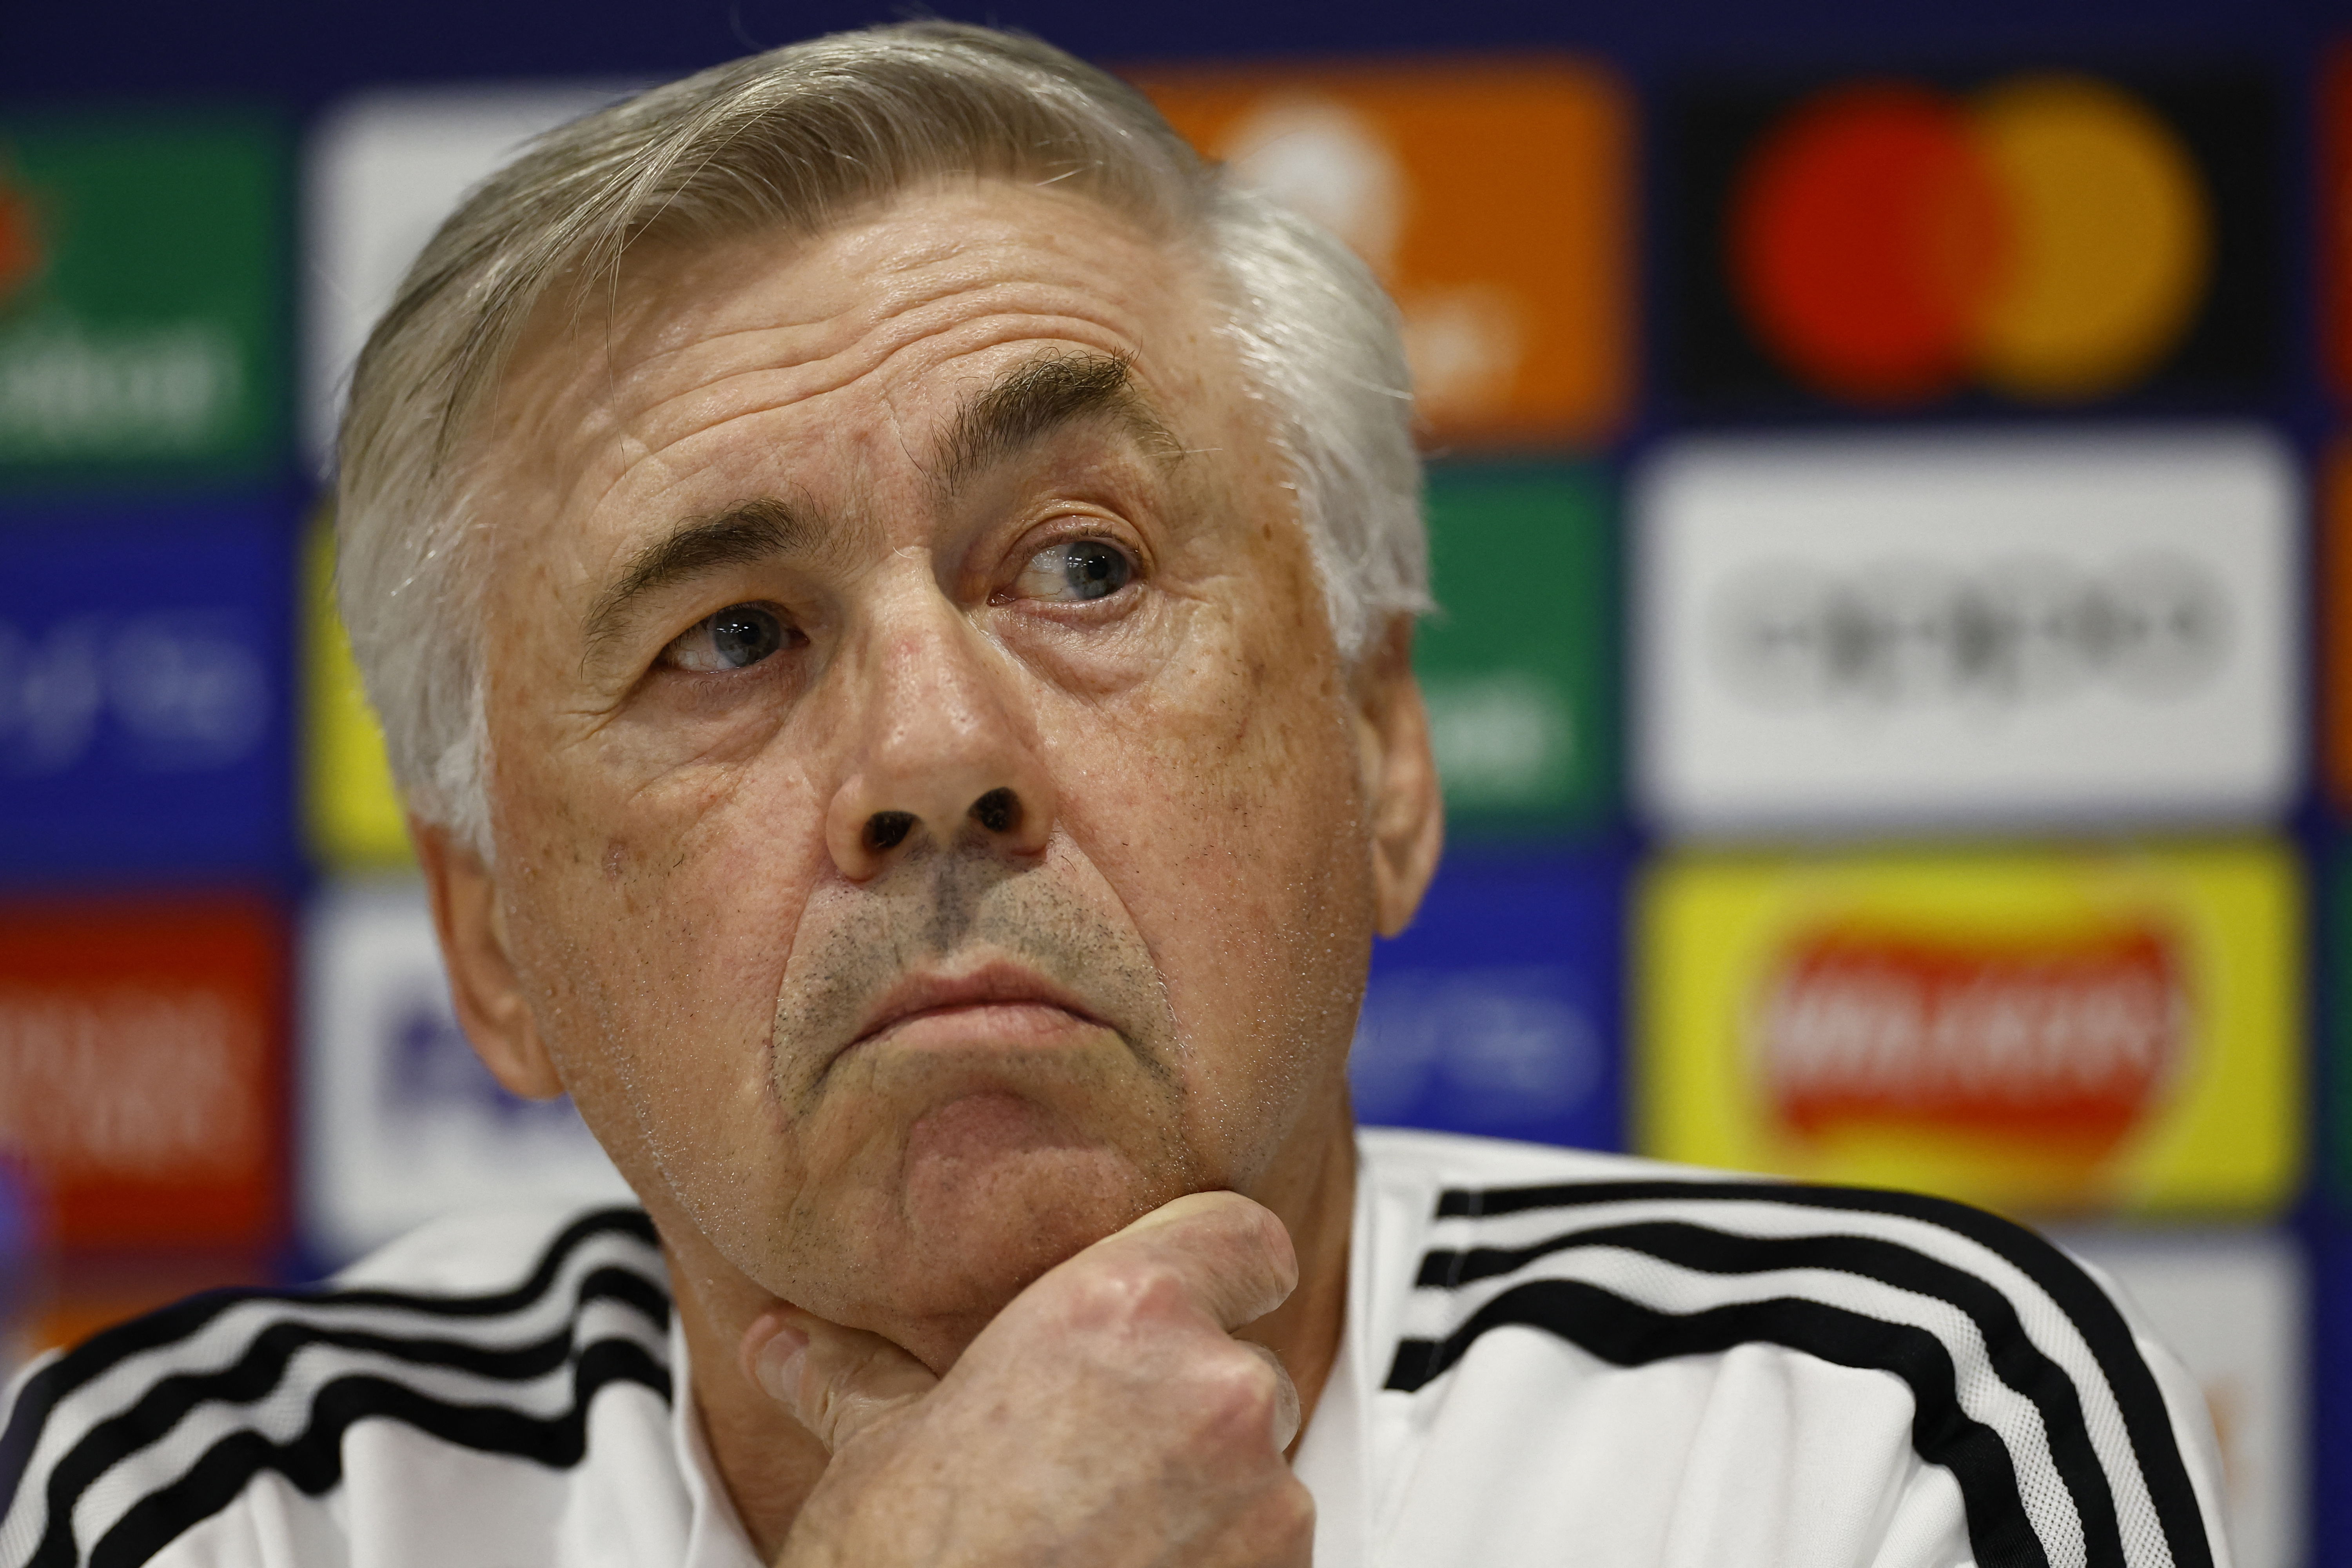 Soccer Football - Champions League - Real Madrid Press Conference - Anfield, Liverpool, Britain - February 20, 2023 Real Madrid coach Carlo Ancelotti during the press conference Action Images via Reuters/Andrew Boyers